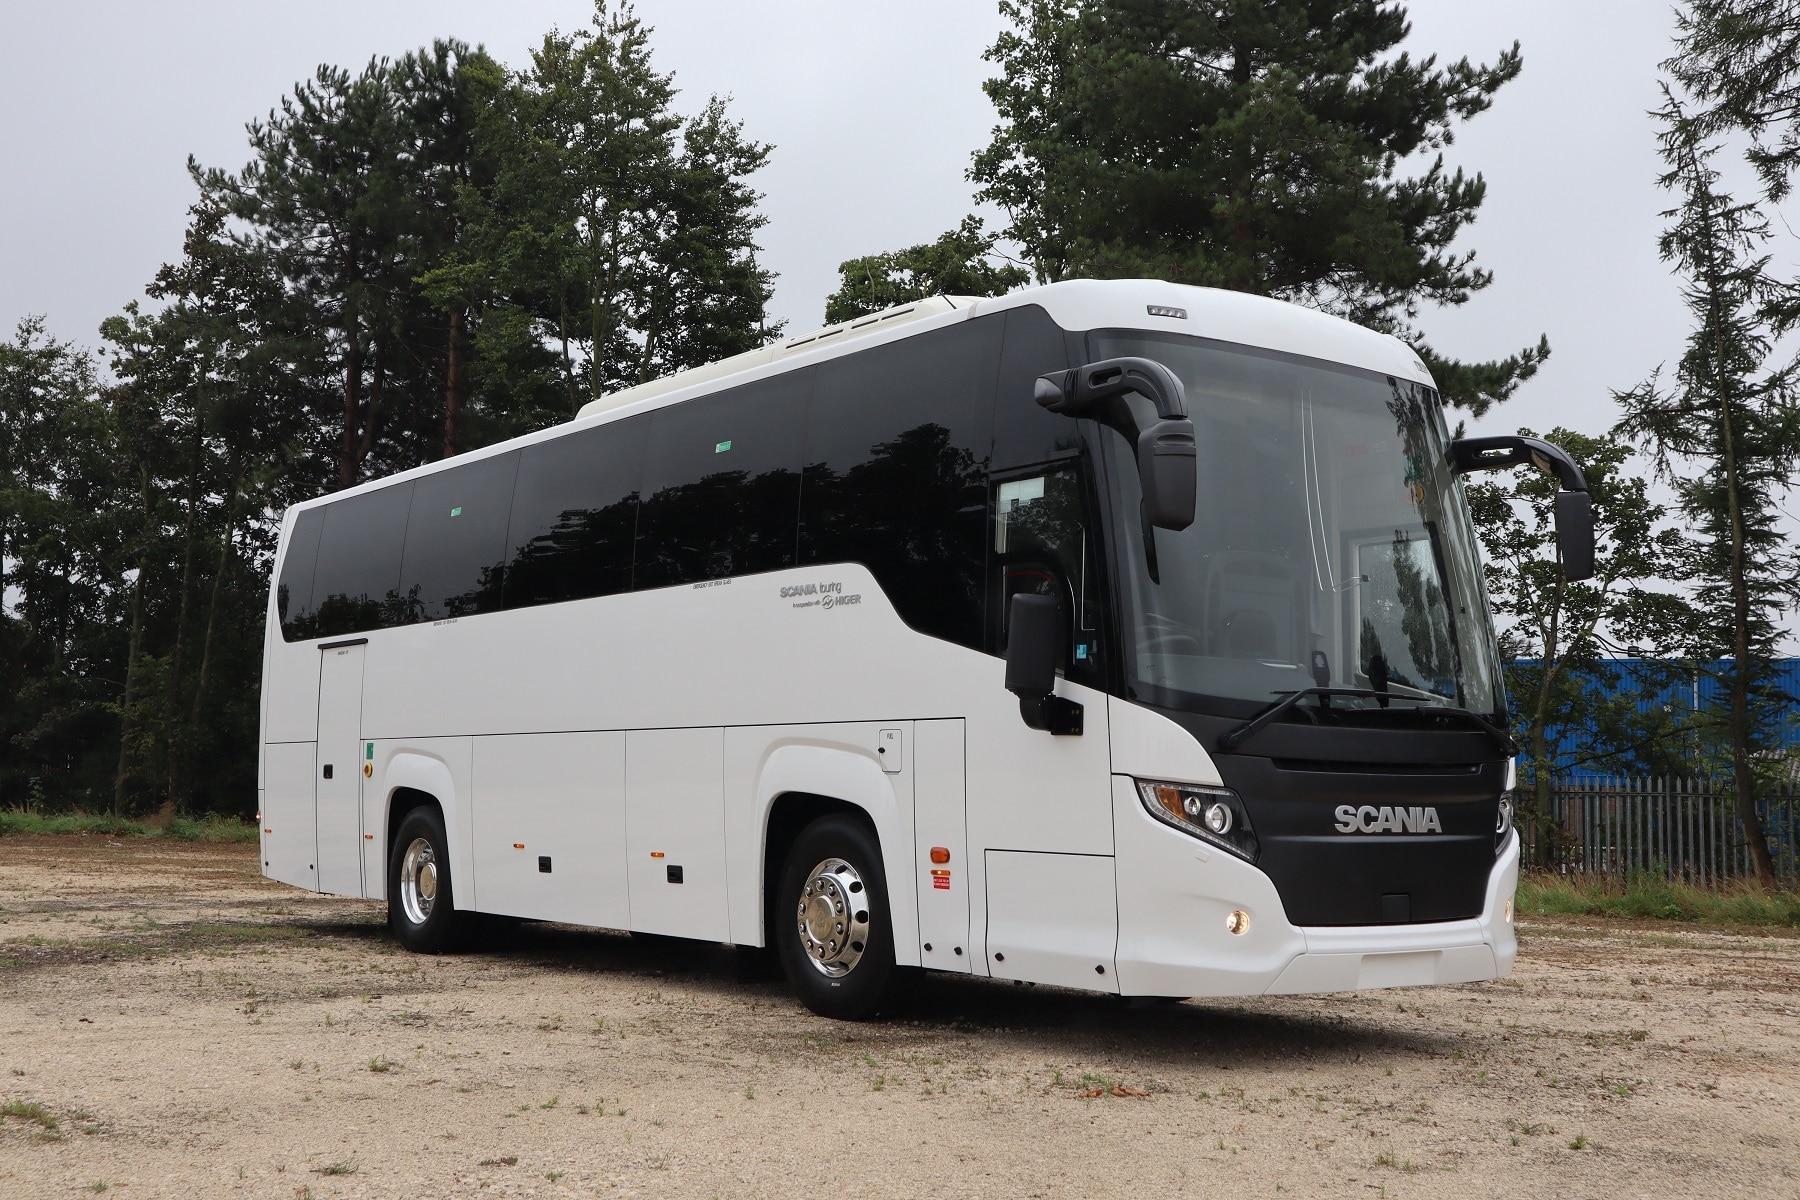 Scania Touring 10.9m mid-sized coach